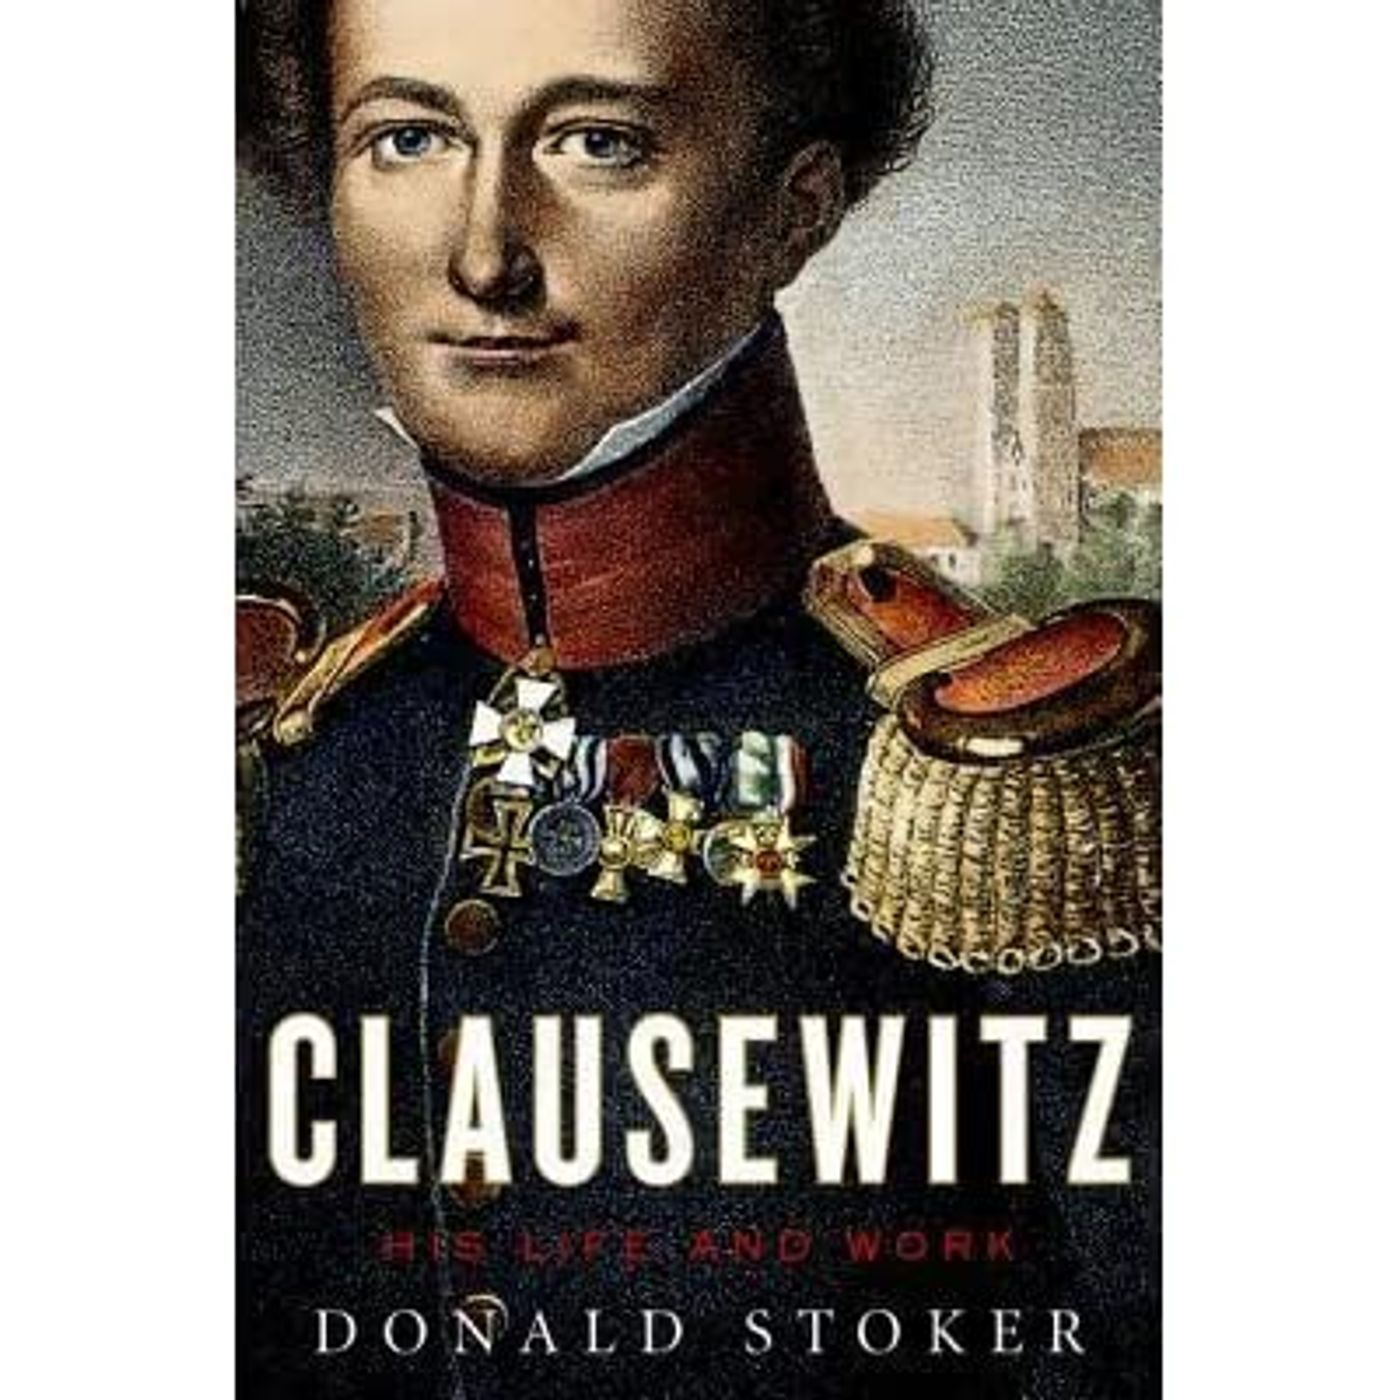 Episode 542: Best of Clausewitz - now more than ever, with Donald Stoker